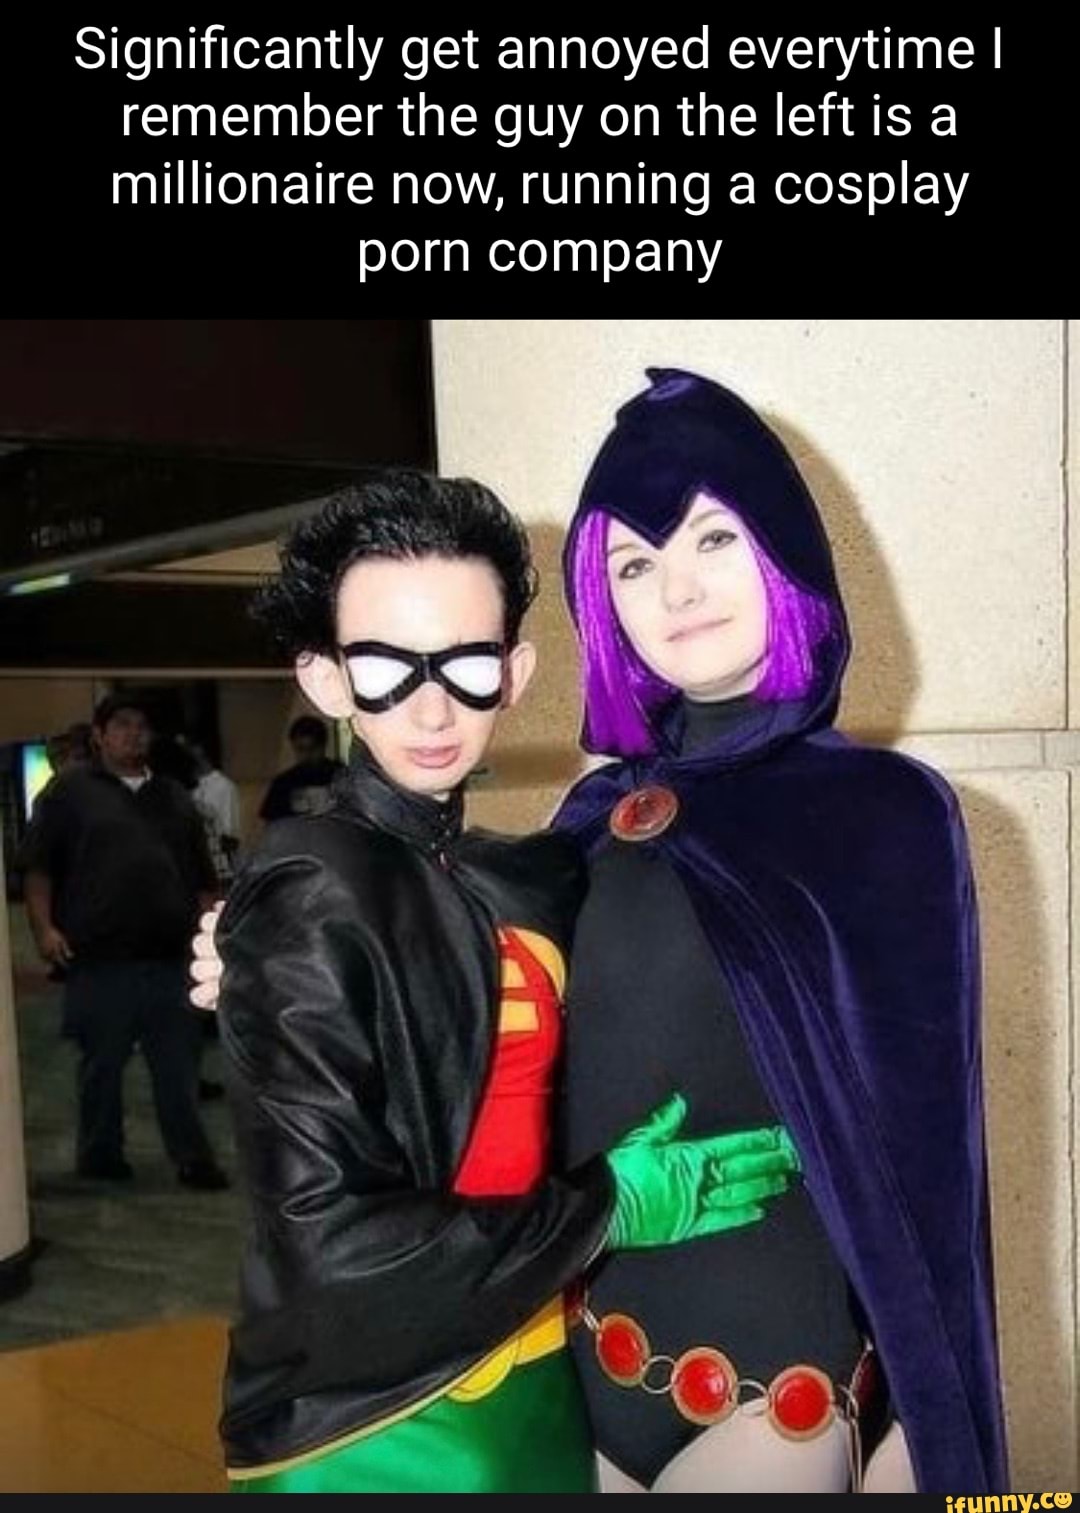 Cosplay Porn Meme - Significantly get annoyed everytime I remember the guy on the left is a  millionaire now, running a cosplay porn company - iFunny Brazil